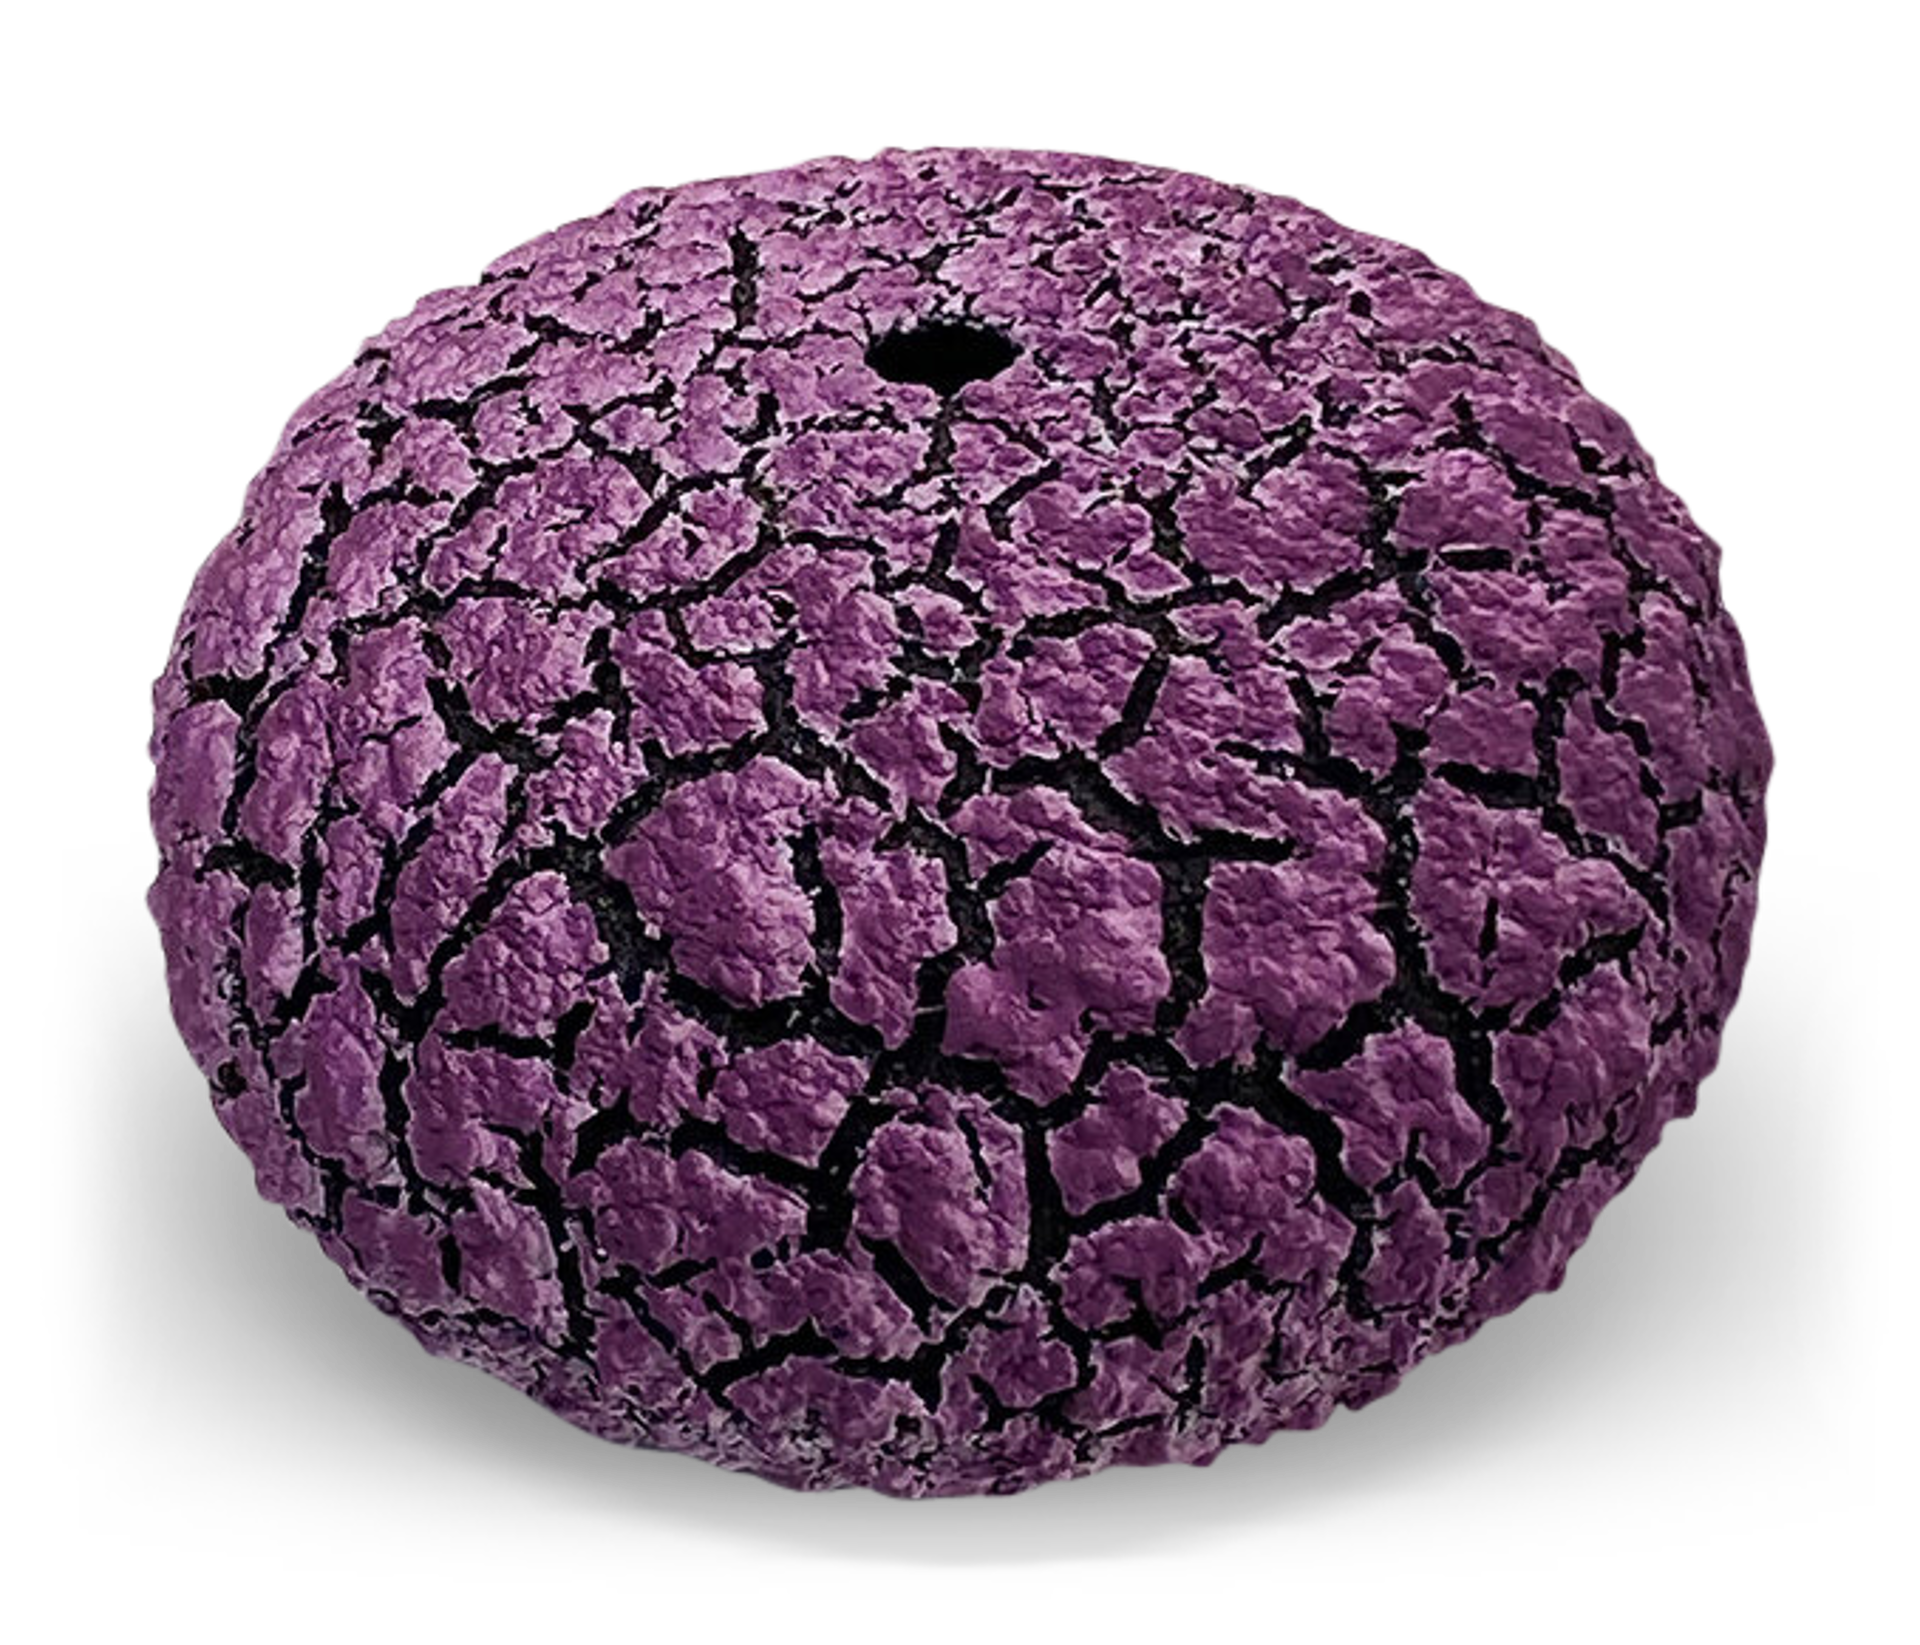 Urchin Vessel ~ Light Purple/Dark Purple (Other colors can be ordered) by Randy O'Brien